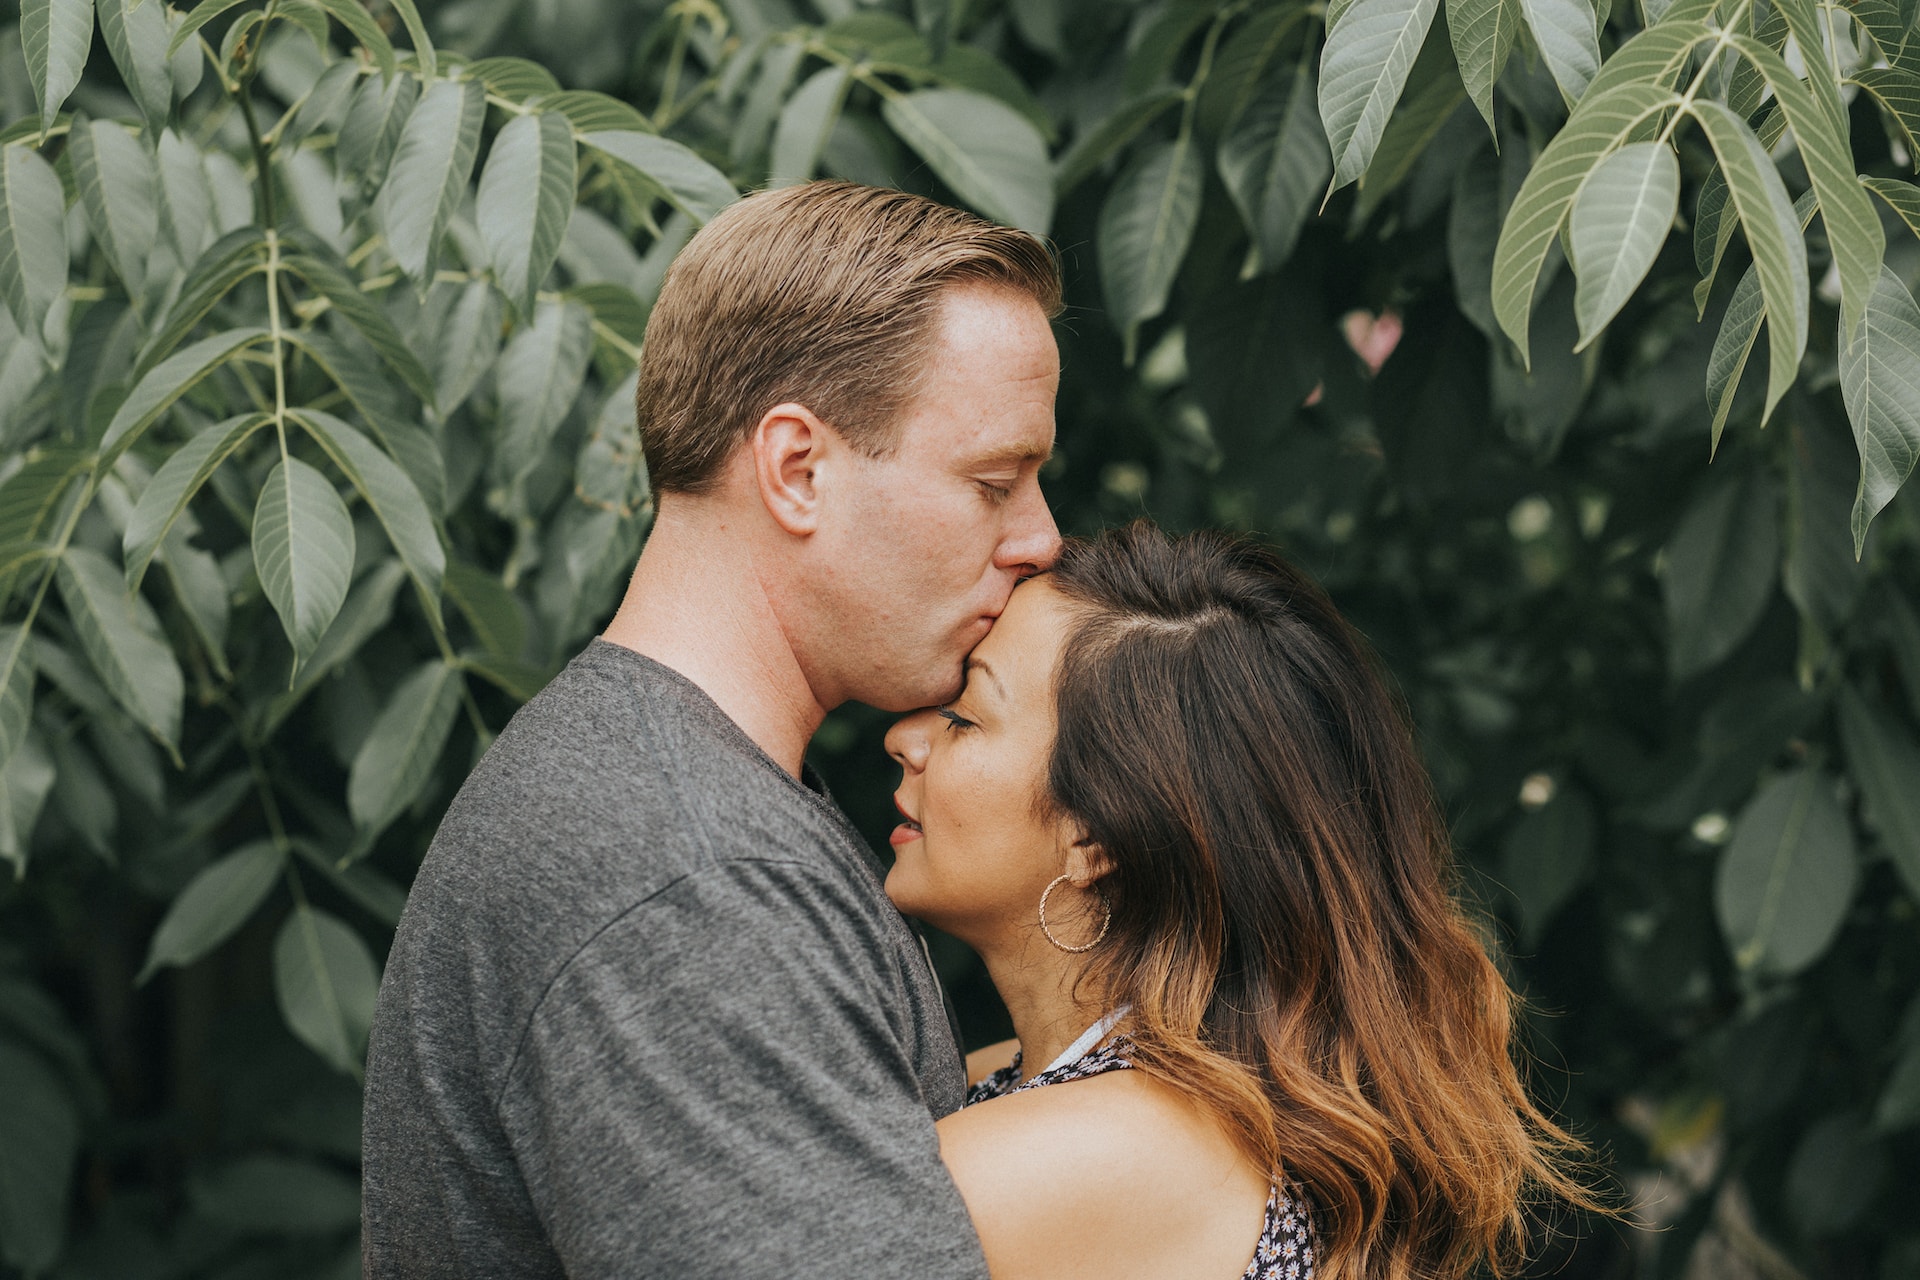 Couple Hugging By Kyle Bearden From Unsplash